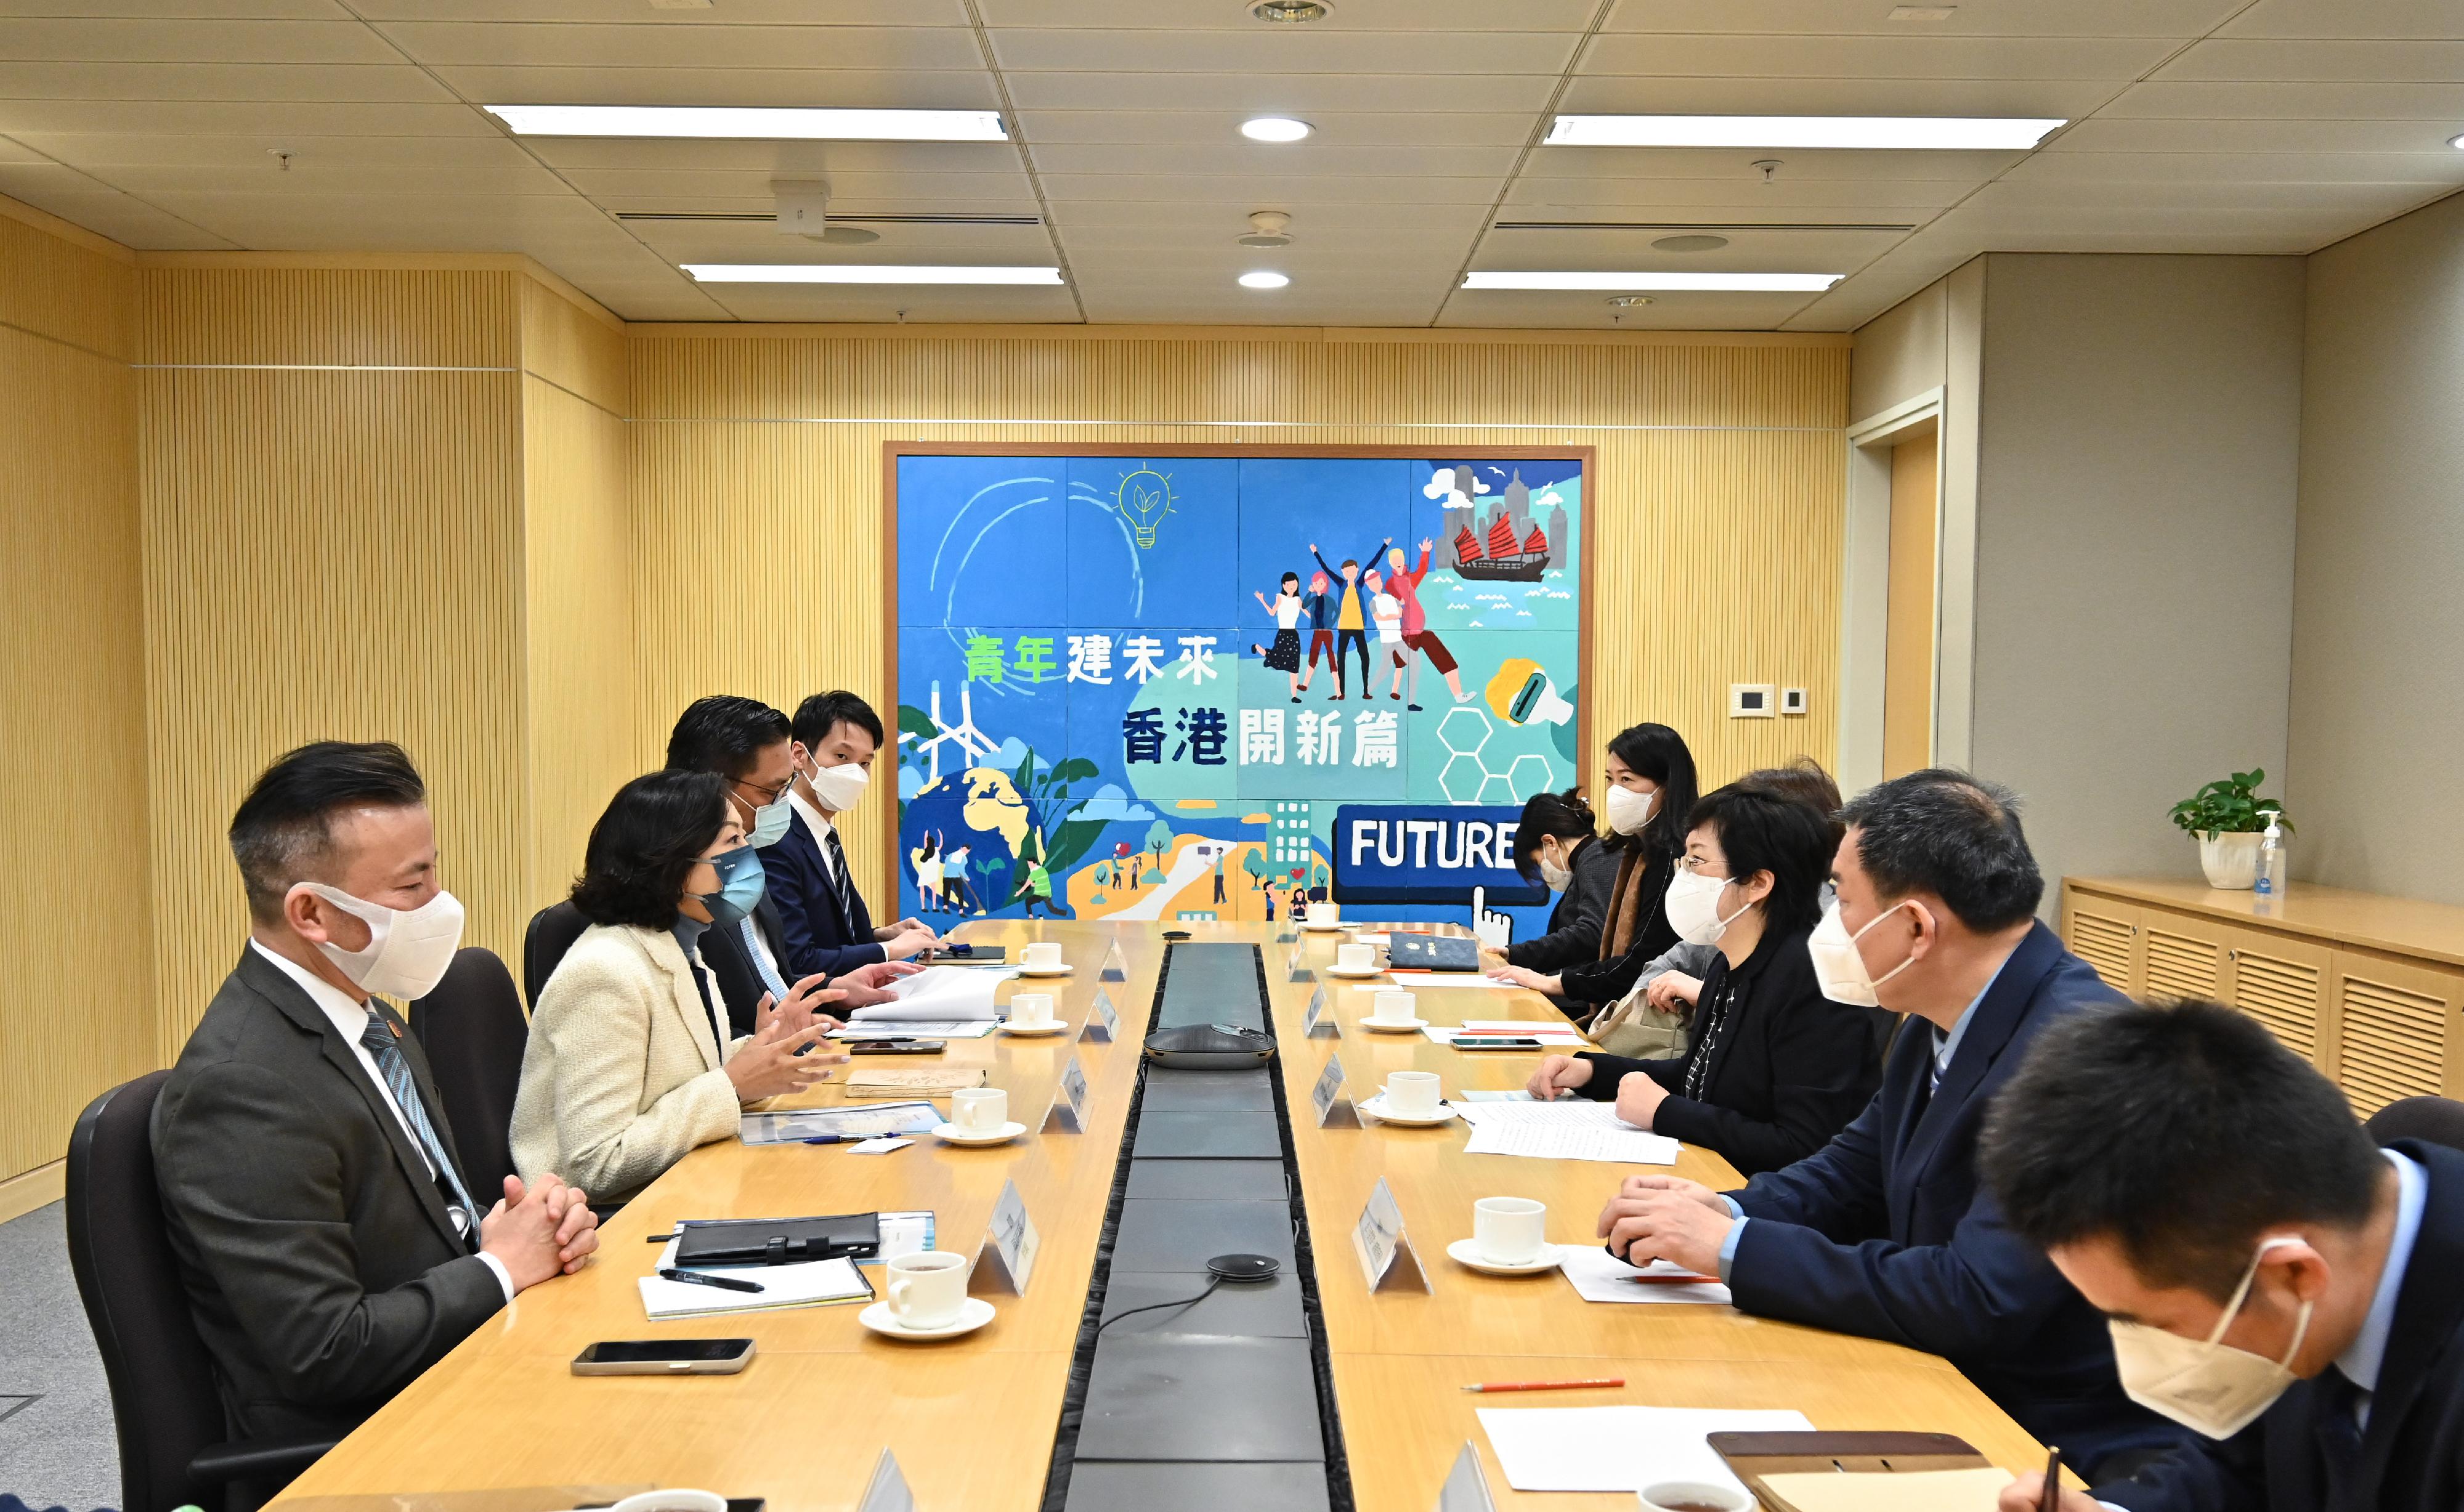 The Secretary for Home and Youth Affairs, Miss Alice Mak, today (February 1) met with a Hainan delegation led by the Standing Committee Member of the CPC Hainan Provincial Committee and Head of the United Front Work Department of the Hainan Committee of the CPC, Ms Miao Yanhong. Photo shows Miss Mak (second left); the Under Secretary for Home and Youth Affairs, Mr Clarence Leung (third left); and the Commissioner for Youth, Mr Wallace Lau (first left), meeting with Ms Miao (third right) and members of the delegation to discuss items of mutual interest.